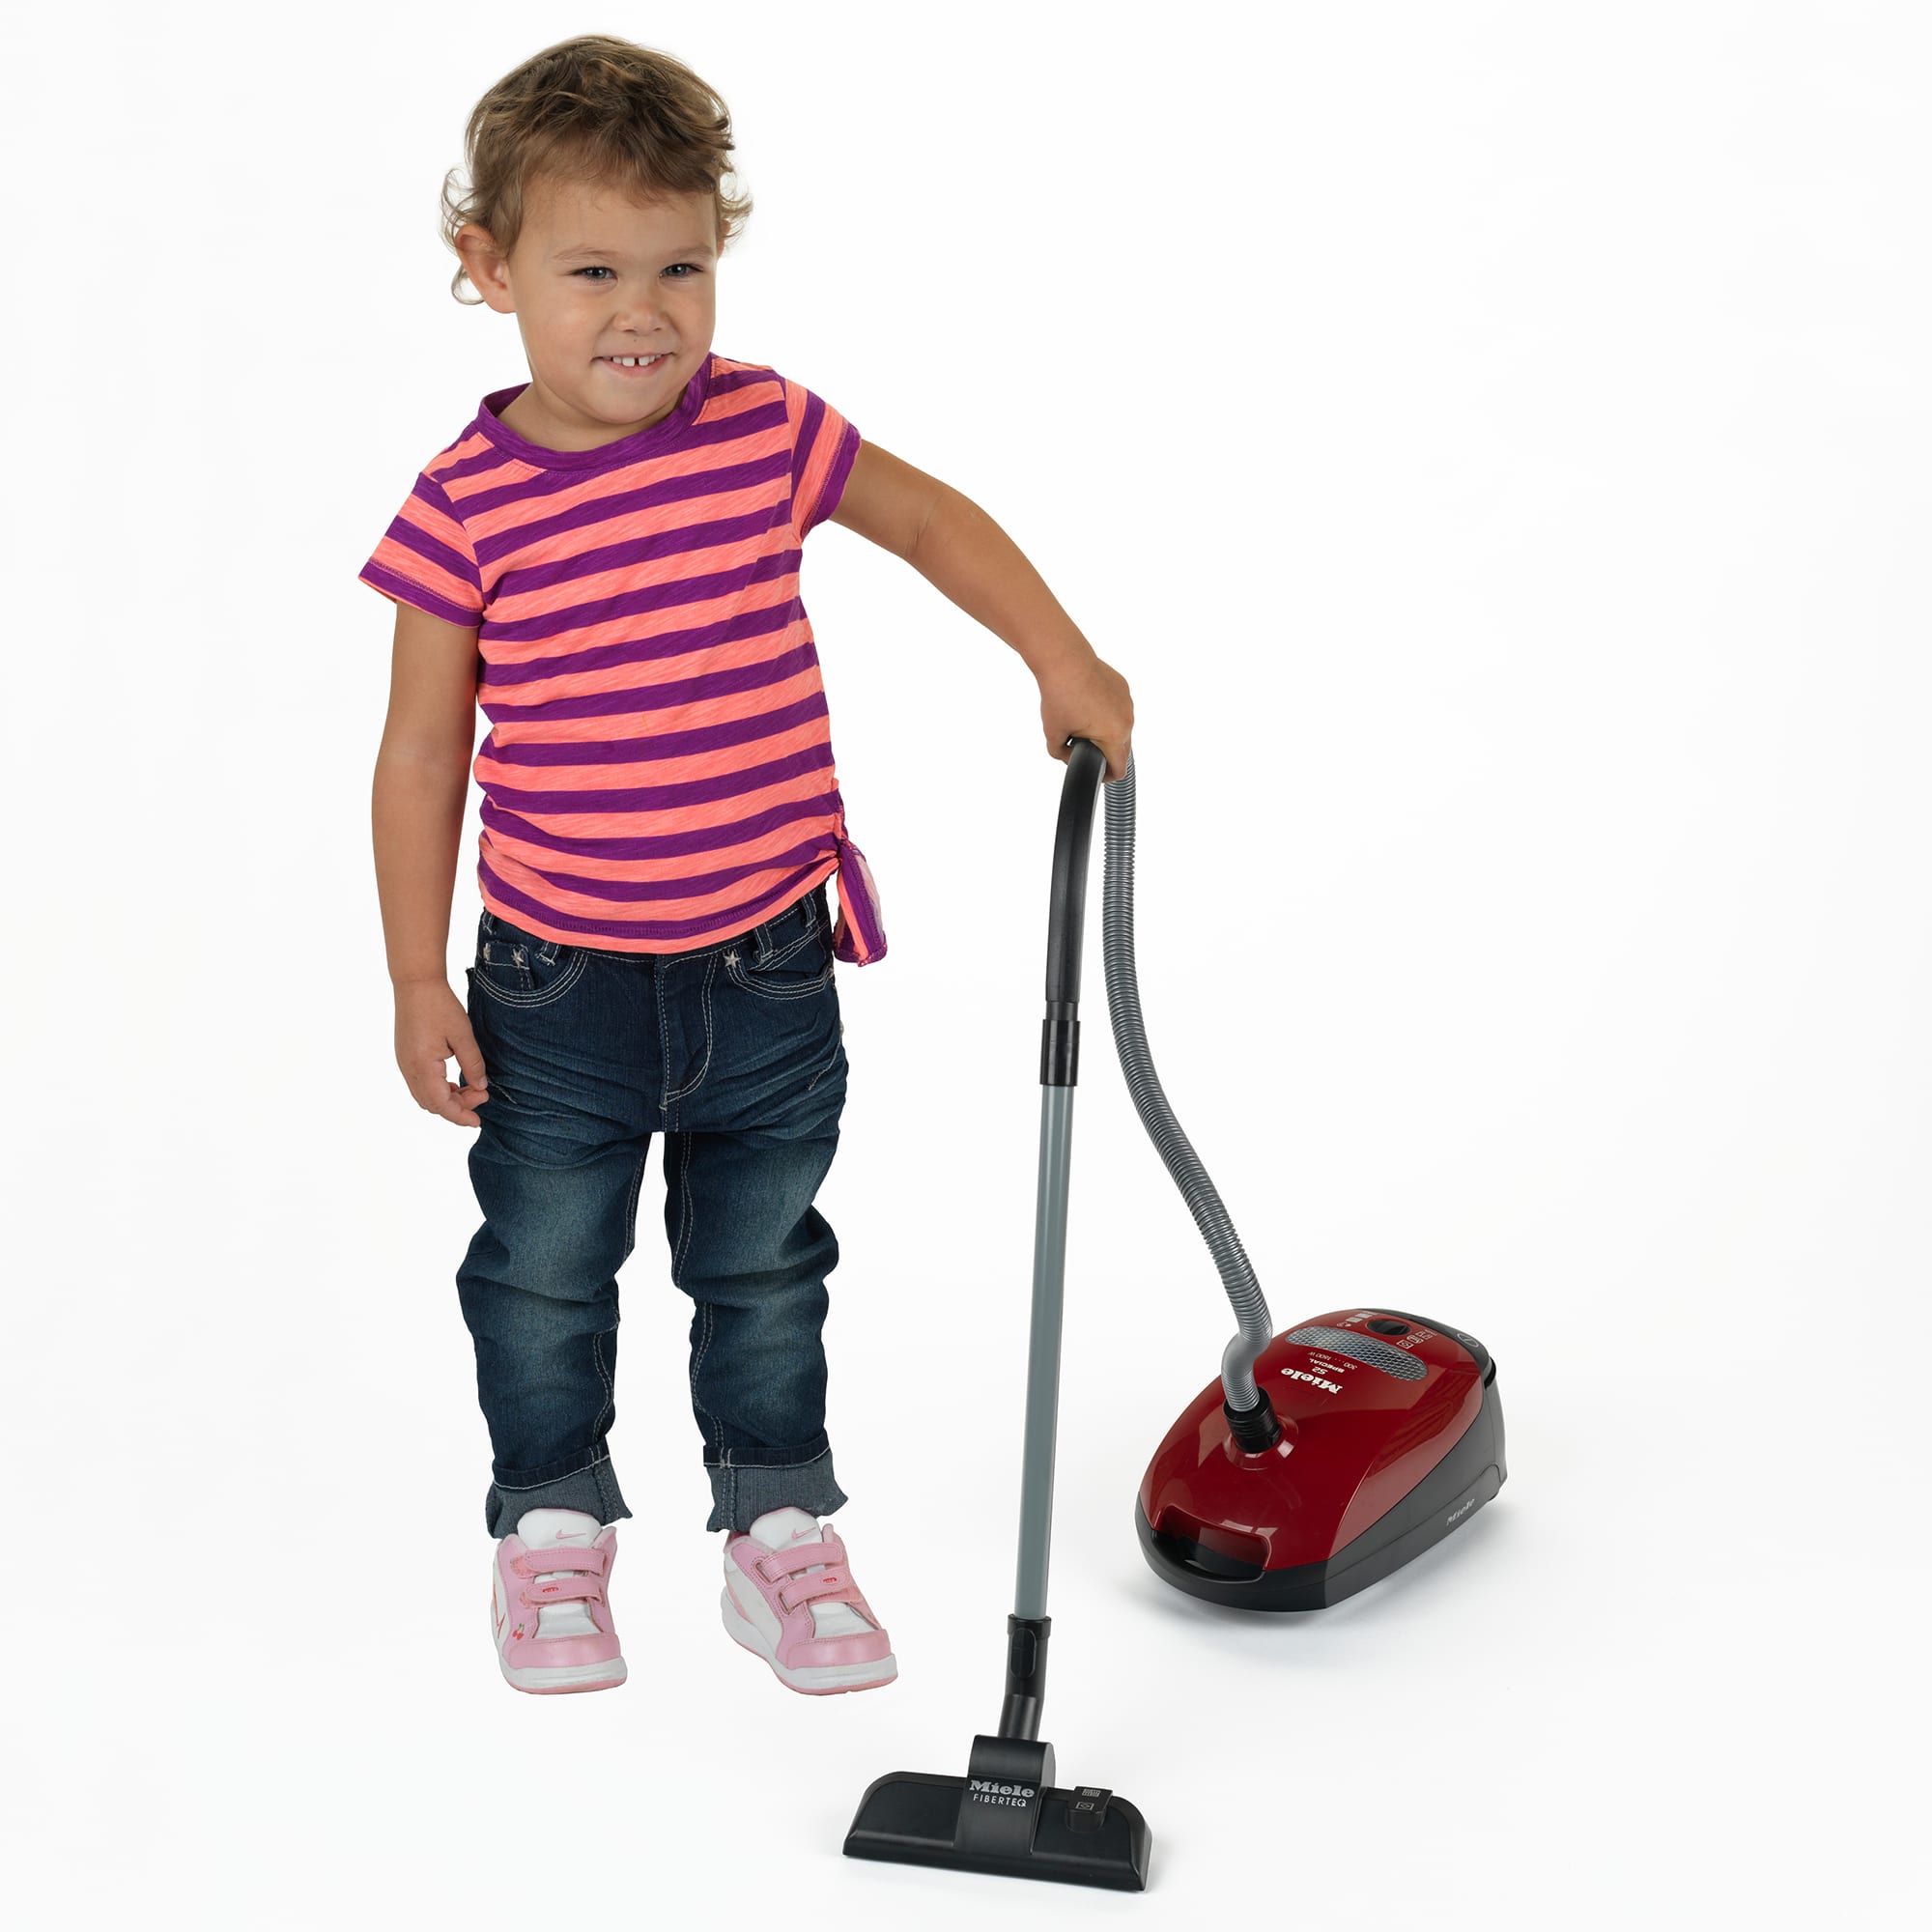 Theo Klein Miele Toy Vacuum Cleaner